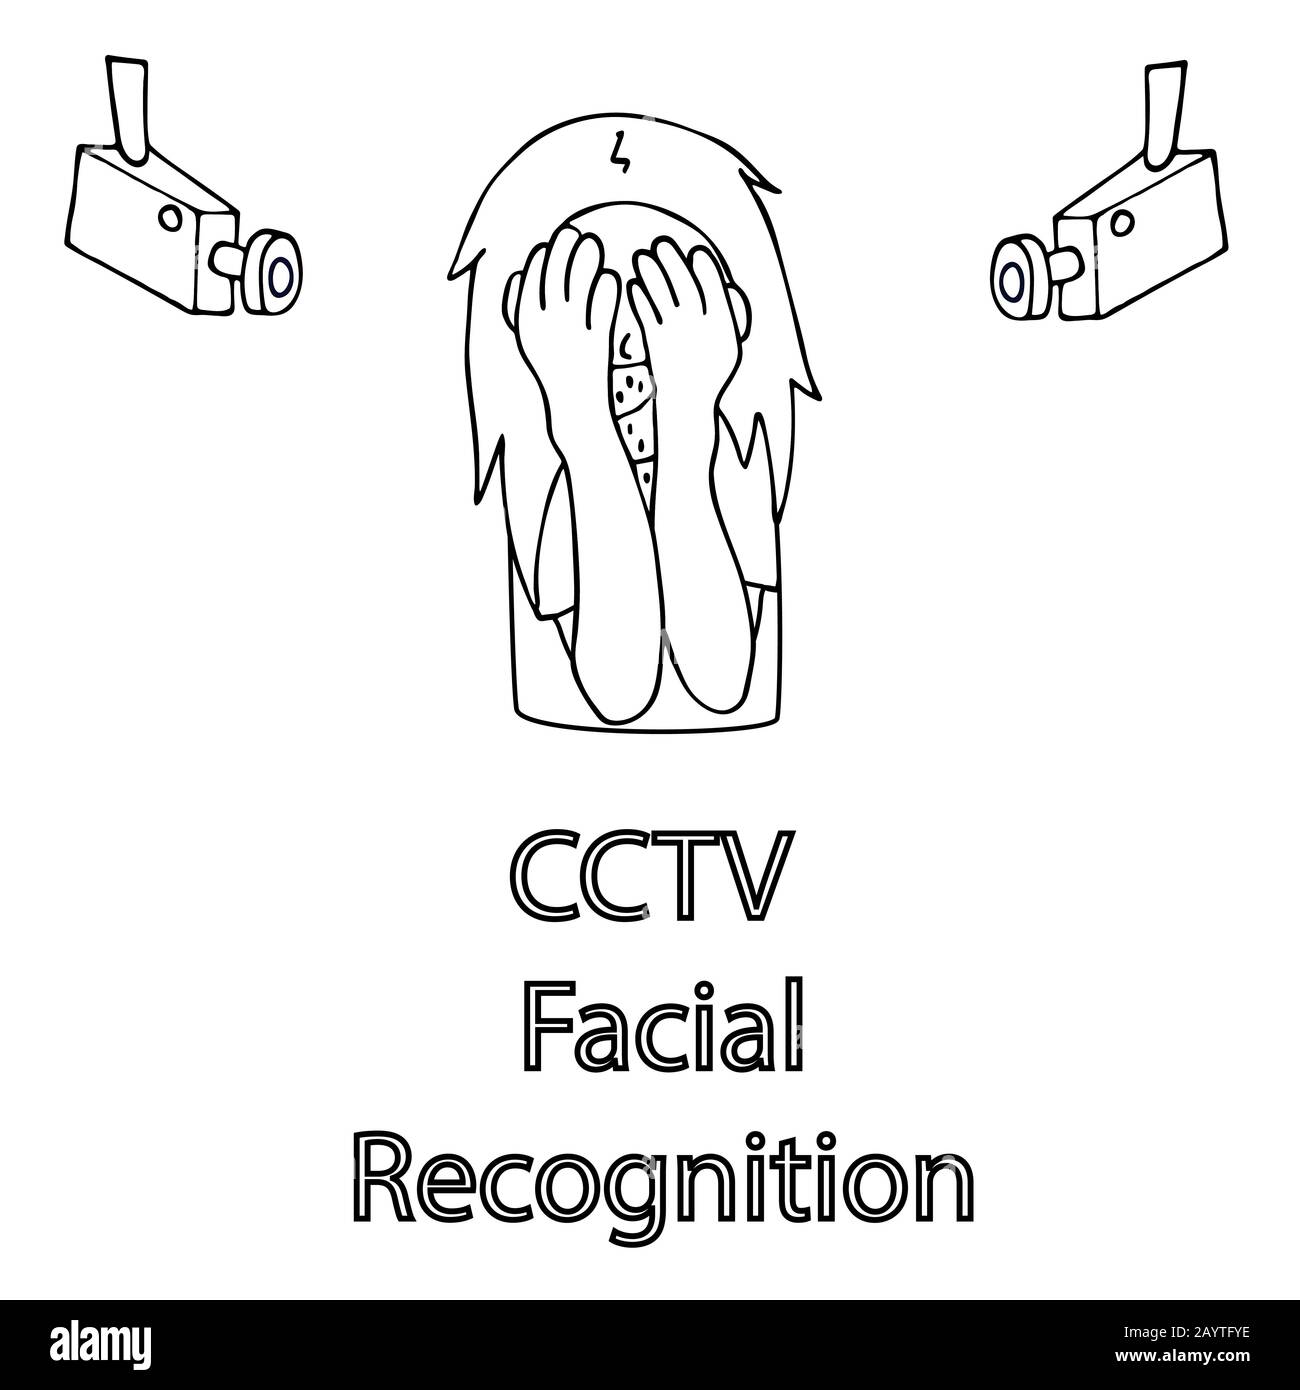 woman hides her face with hands from surveillance cameras. cctv facial recognition. white background isolated outline stock vector illustration Stock Vector